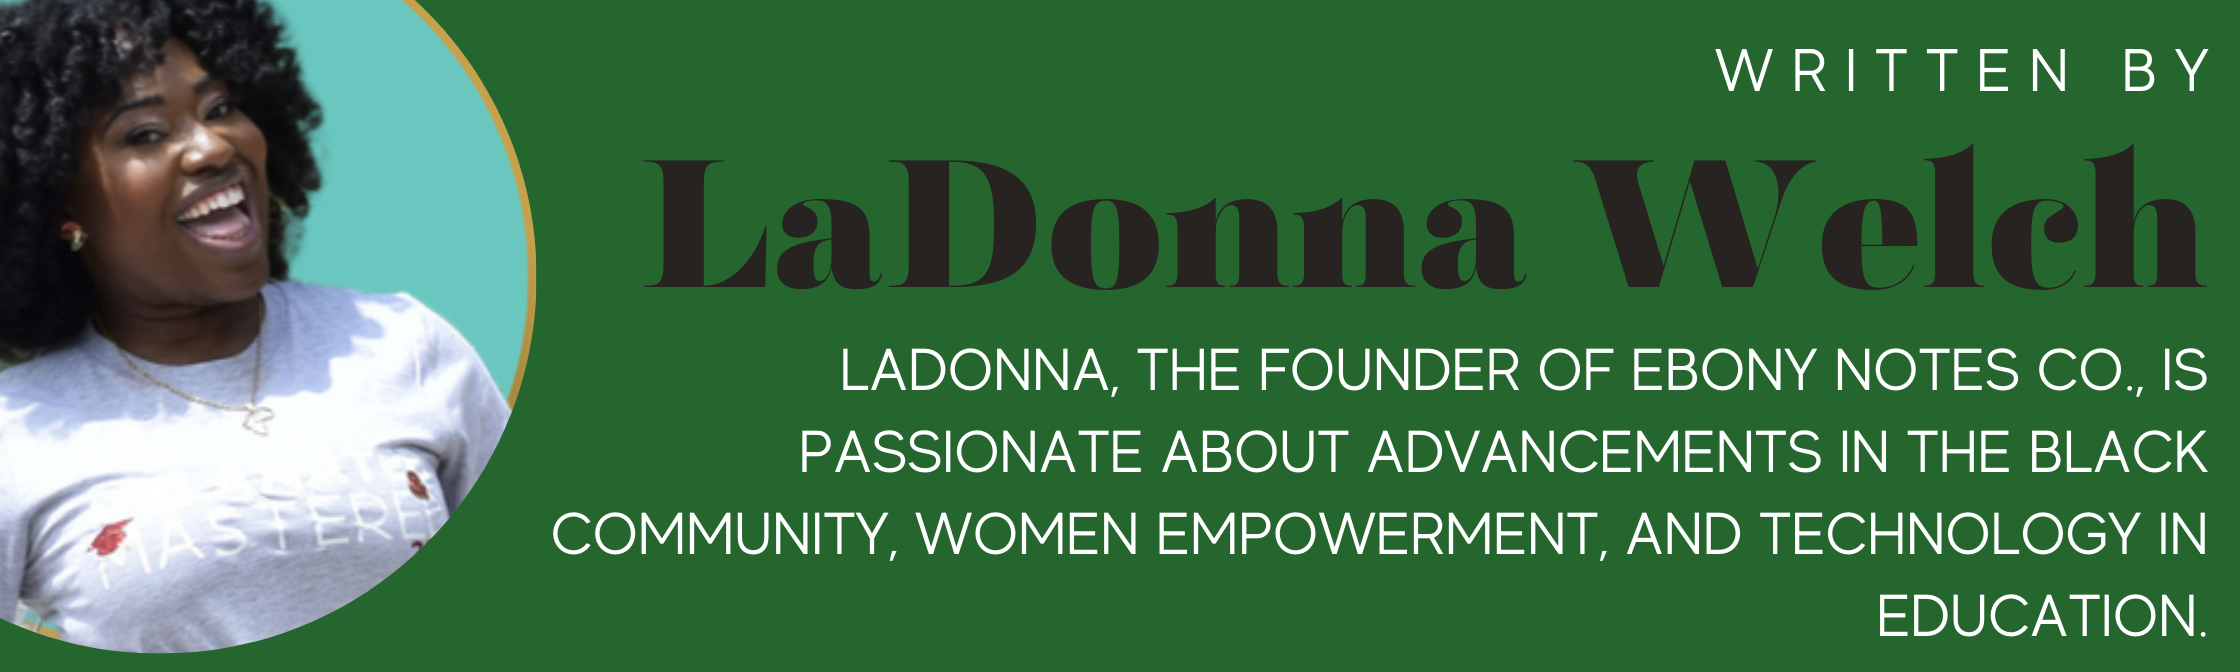 LaDonna Welch Founder of Ebony Notes Blog Author